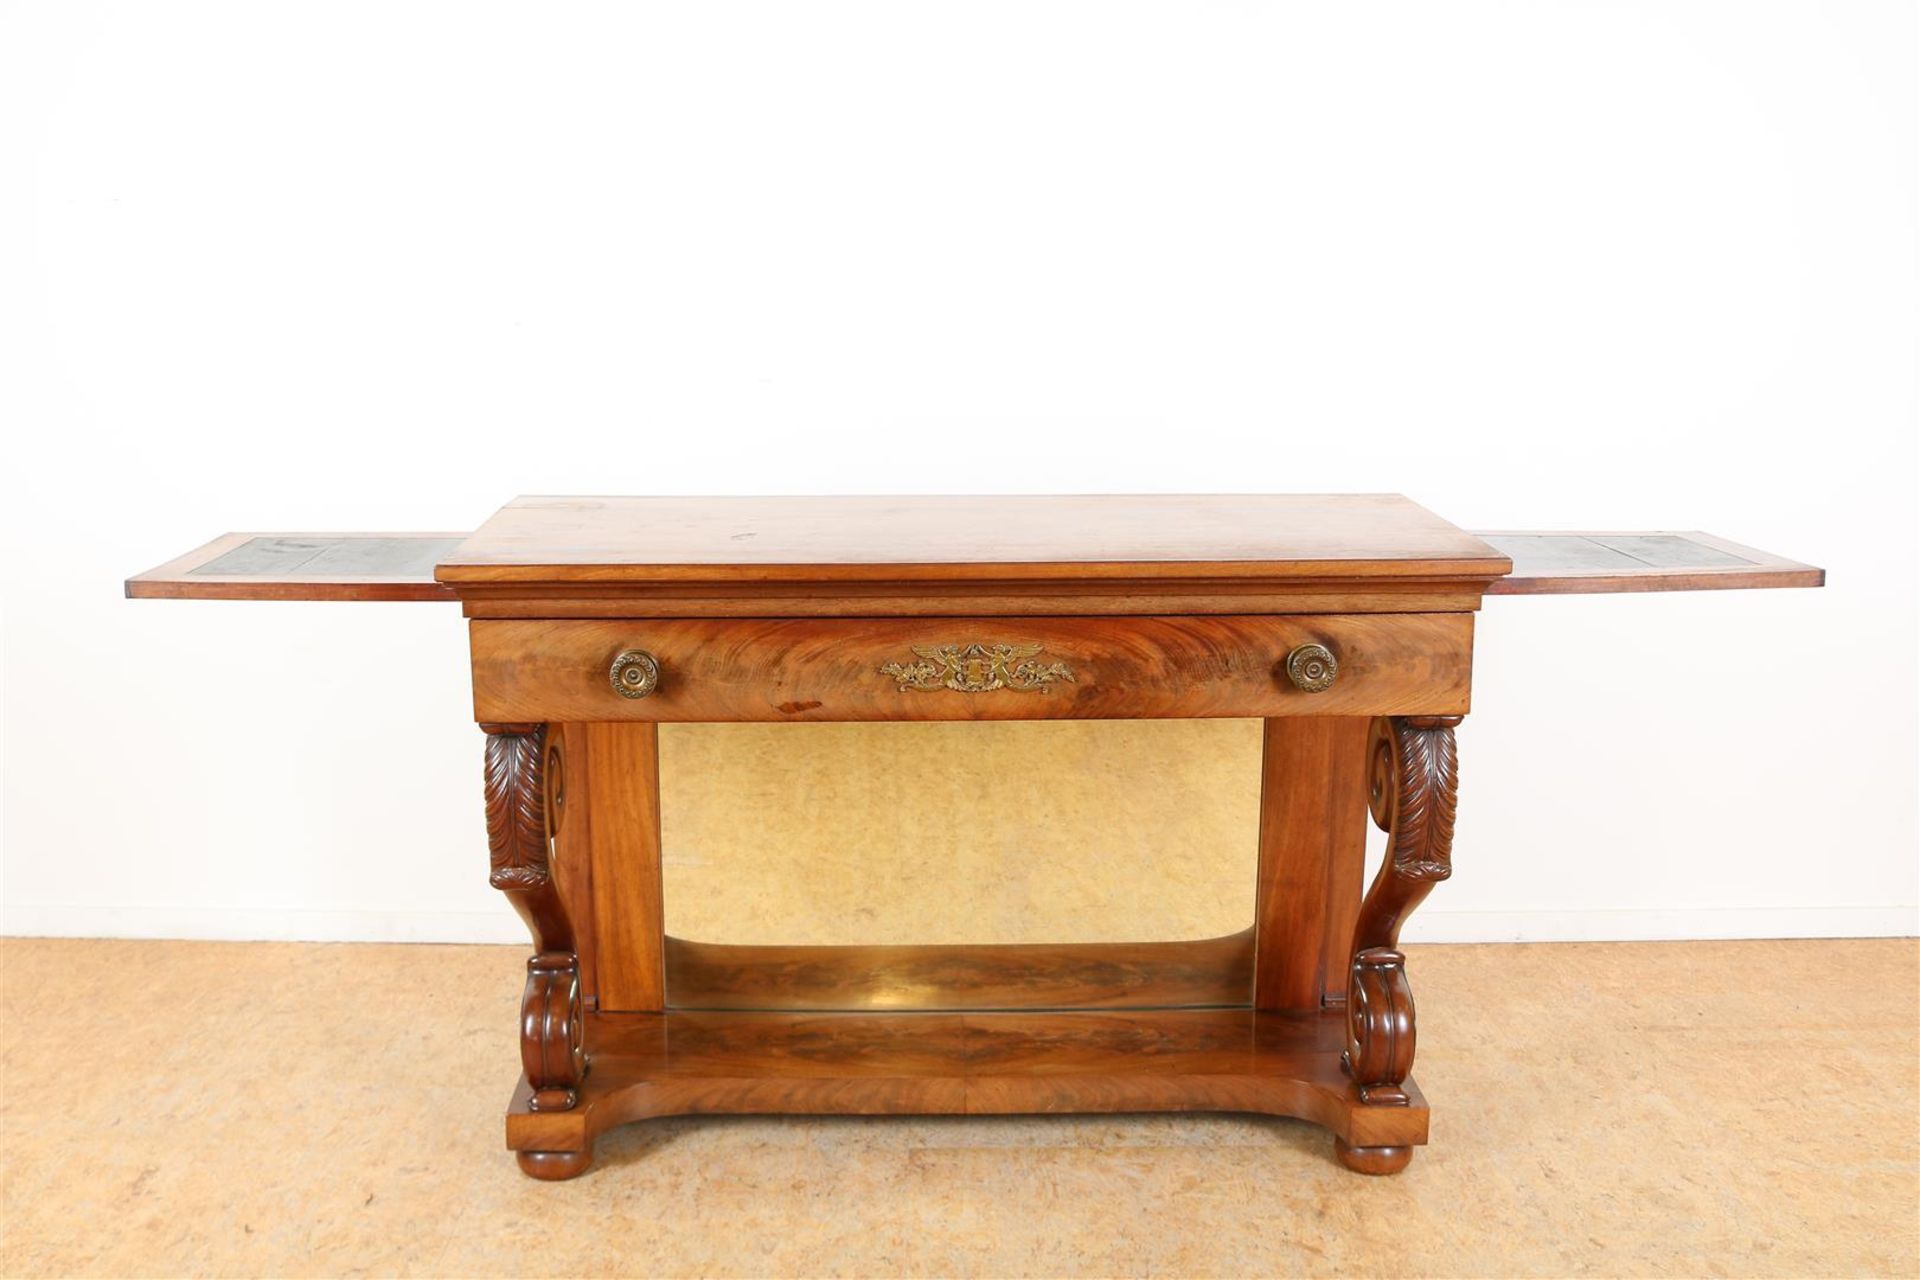 Mahogany Empire trumeau with plinth drawer on volutes with carved acanthus leaves, 2 side leaves and - Image 6 of 8